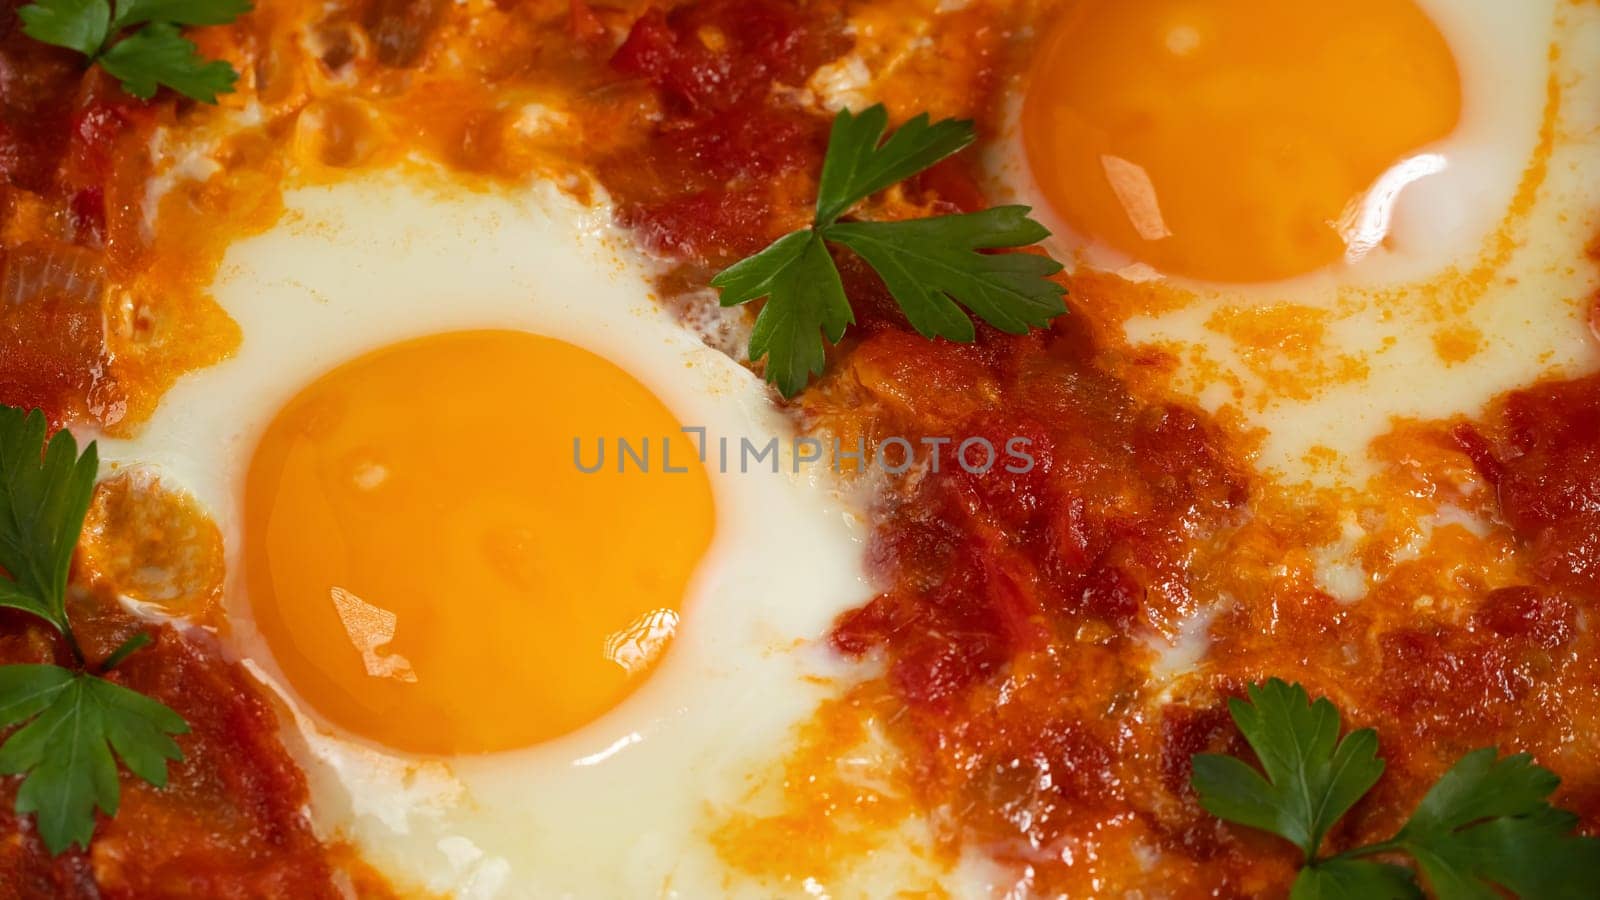 Two egg shakshuka in tomato sauce with fresh tomatoes, spices and herbs. Close-up scrambled eggs.